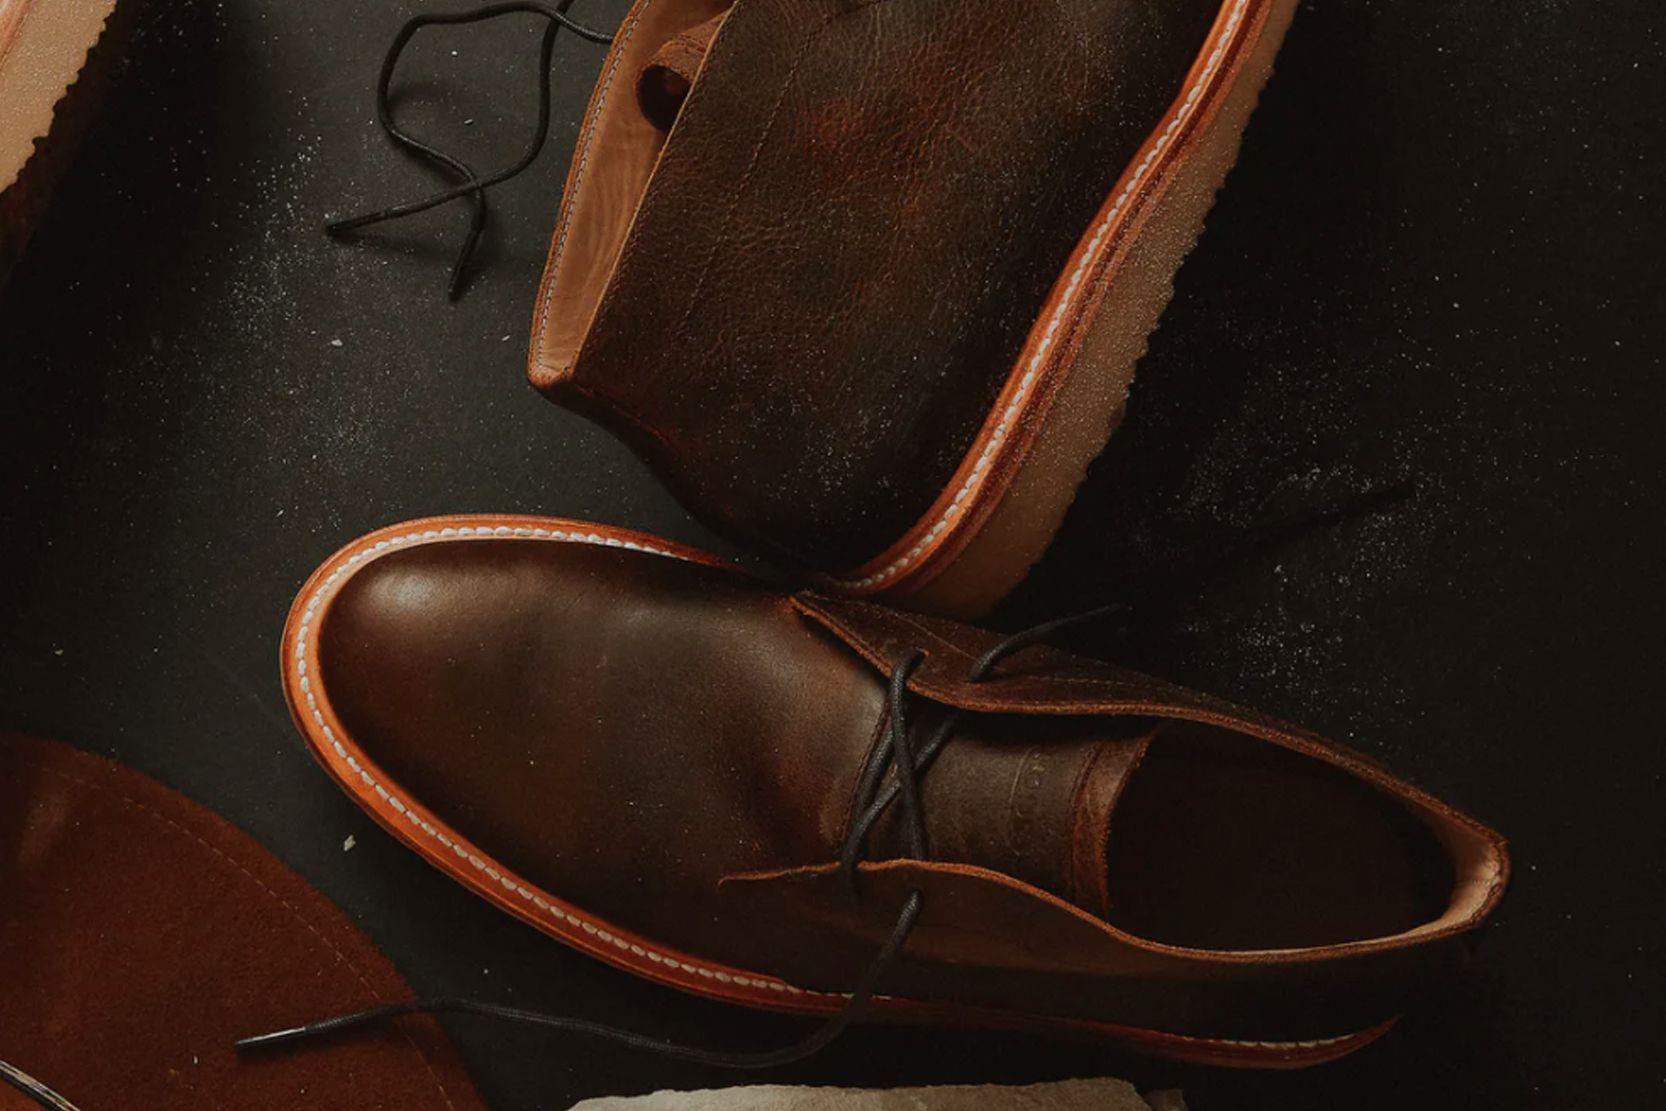 See Now, Buy Now: These R.M. Williams Chelsea Boots from Huckberry are the  Best Winter Dress Boots